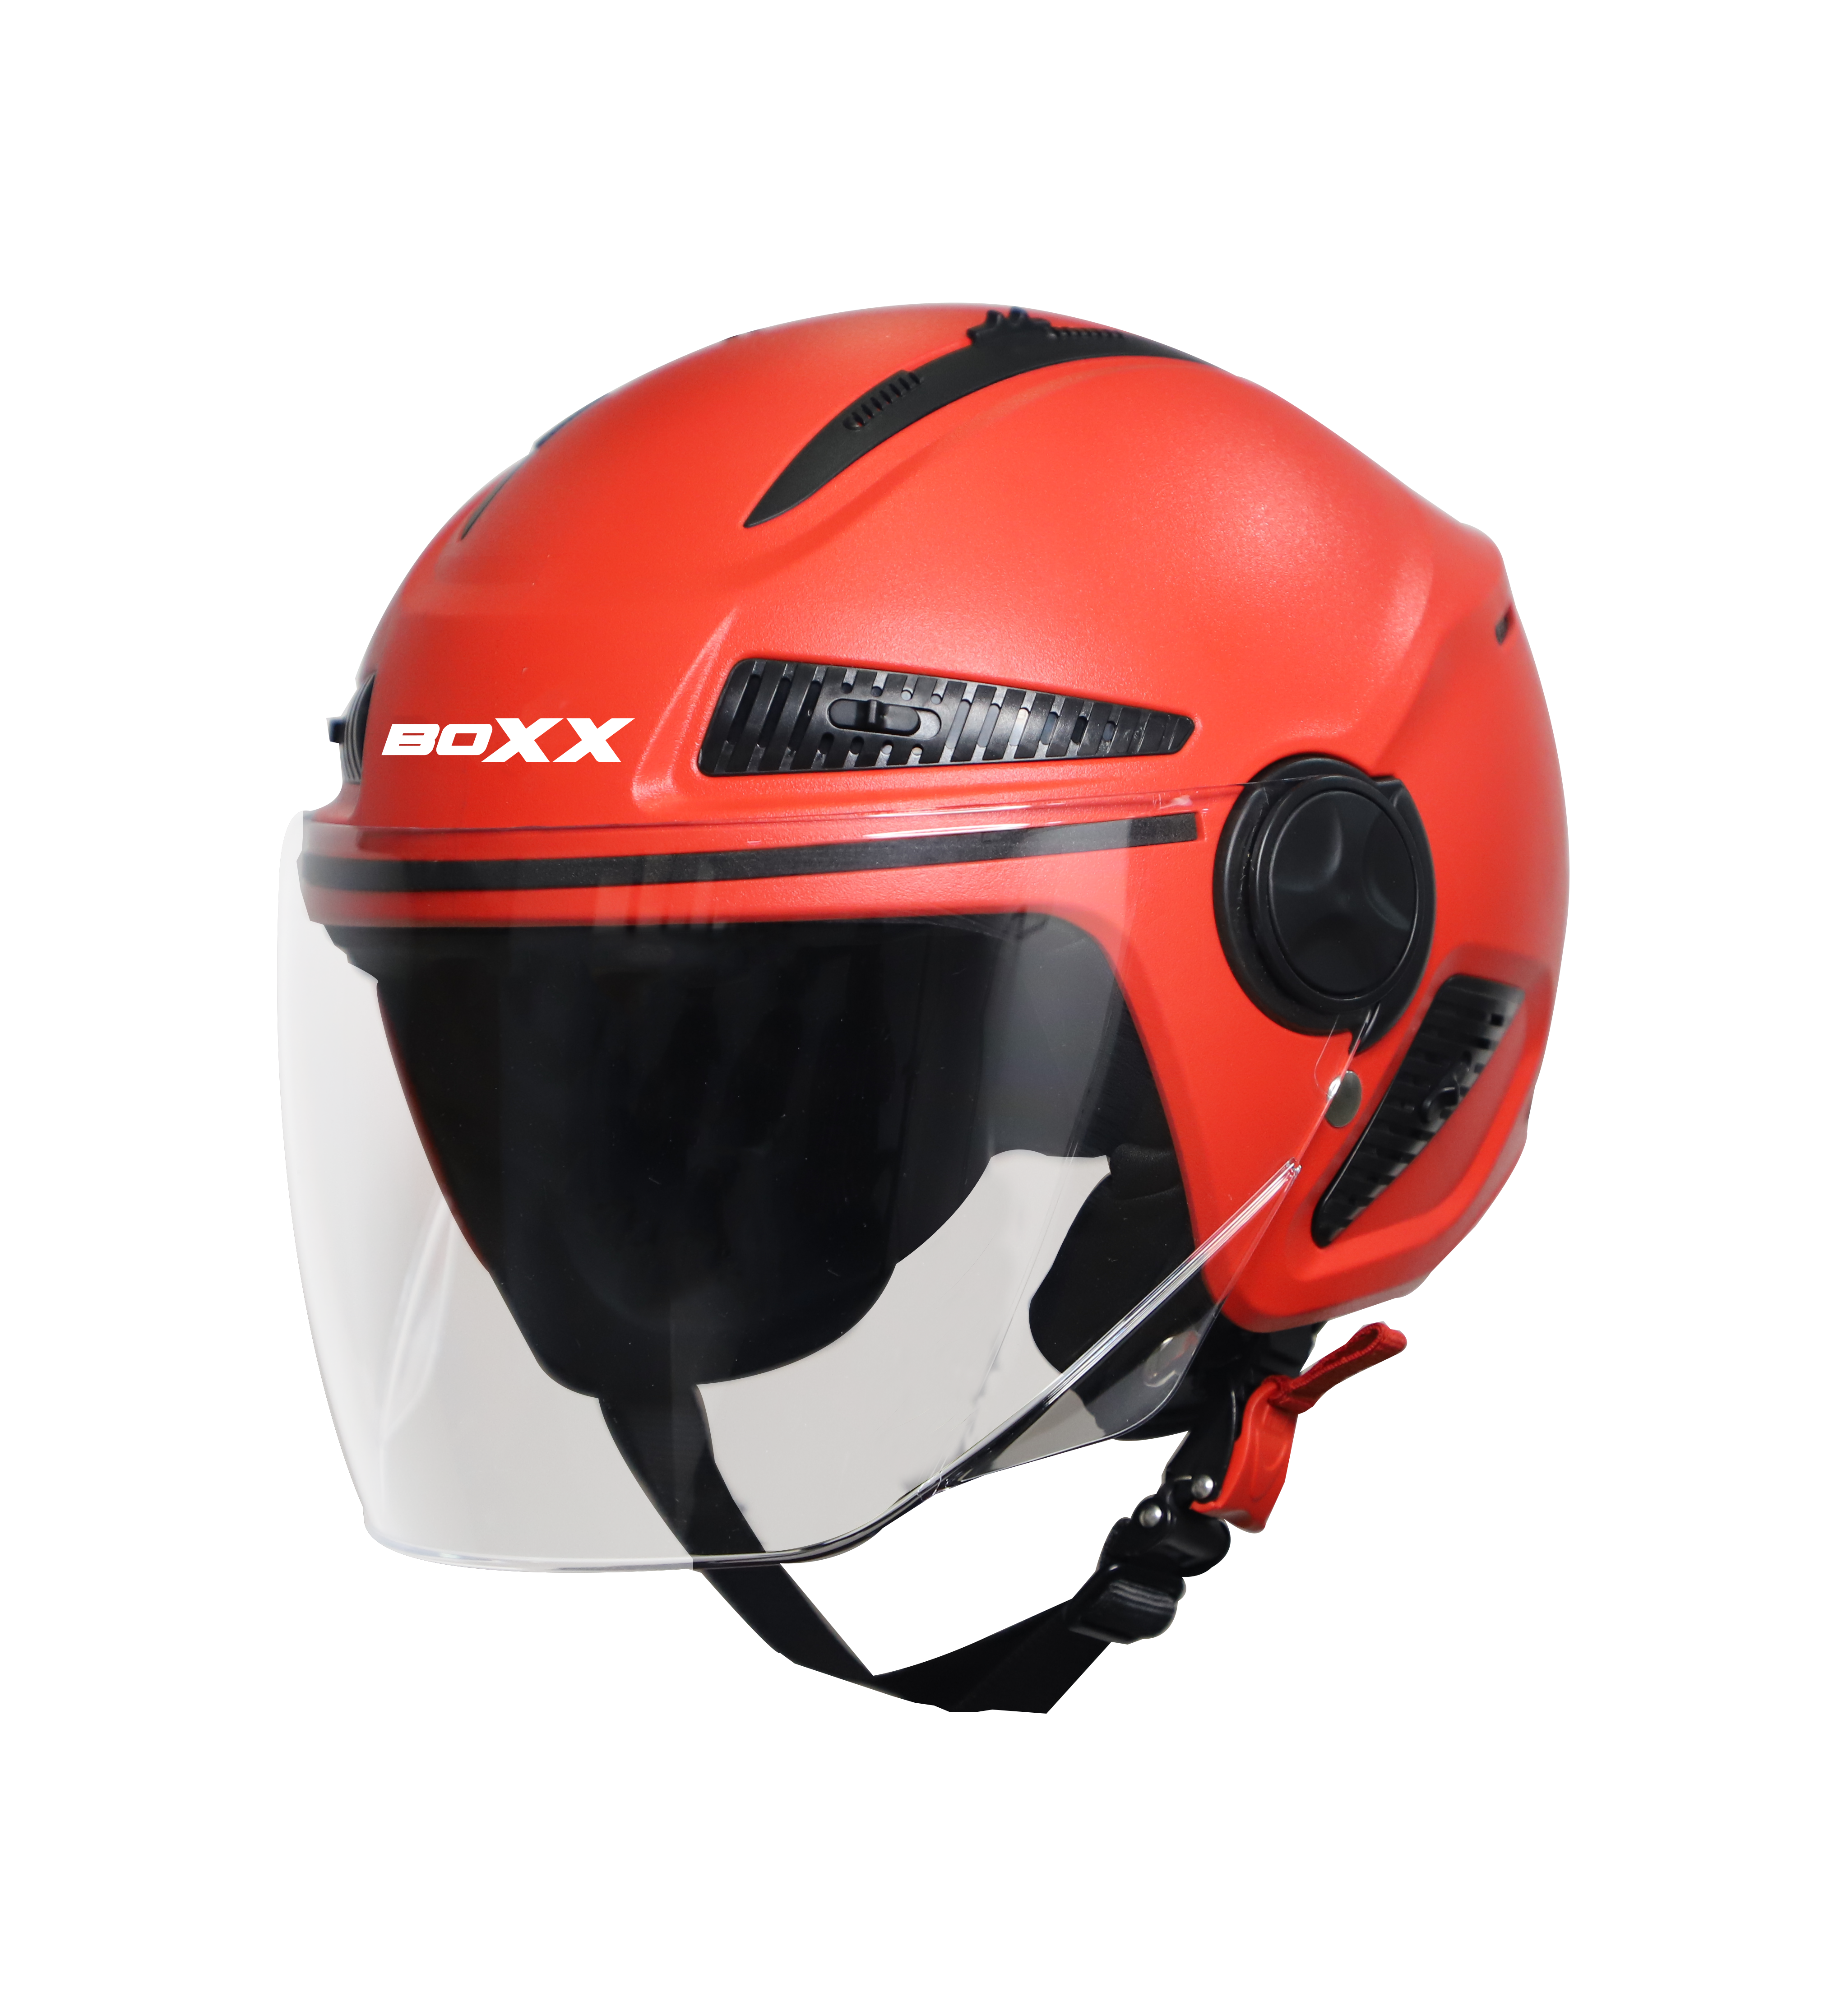 Steelbird SBH-24 Boxx Dashing ISI Certified Open Face Helmet for Men and Women (Red with Clear Visor)